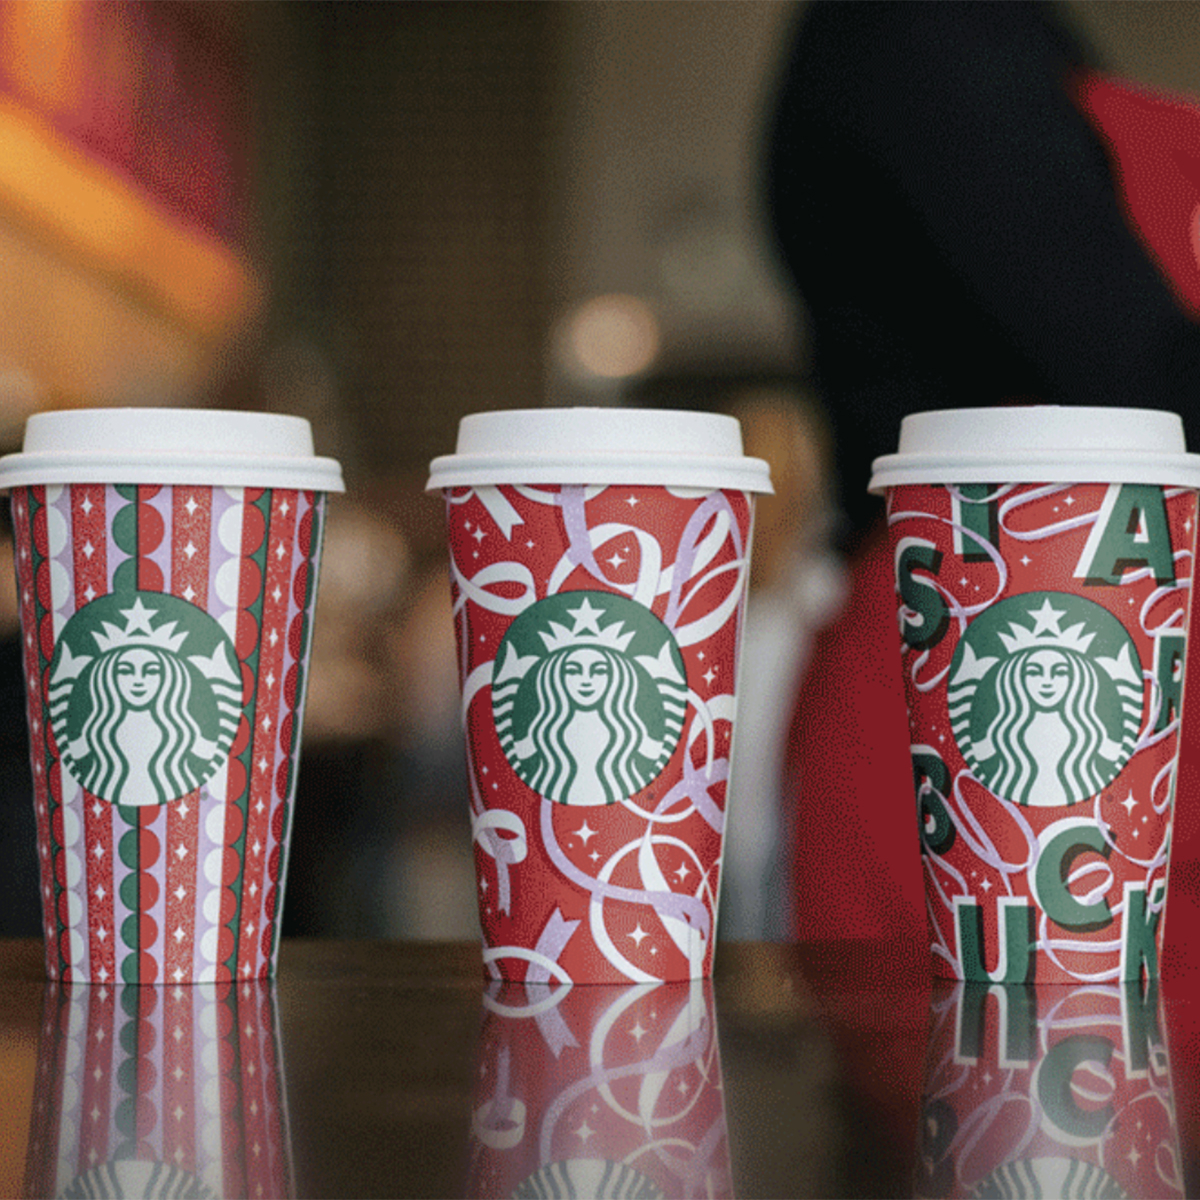 https://akns-images.eonline.com/eol_images/Entire_Site/2021103/rs_1200x1200-211103091444-1200-Starbucks-Holiday-Cups.jpg?fit=around%7C1080:1080&output-quality=90&crop=1080:1080;center,top